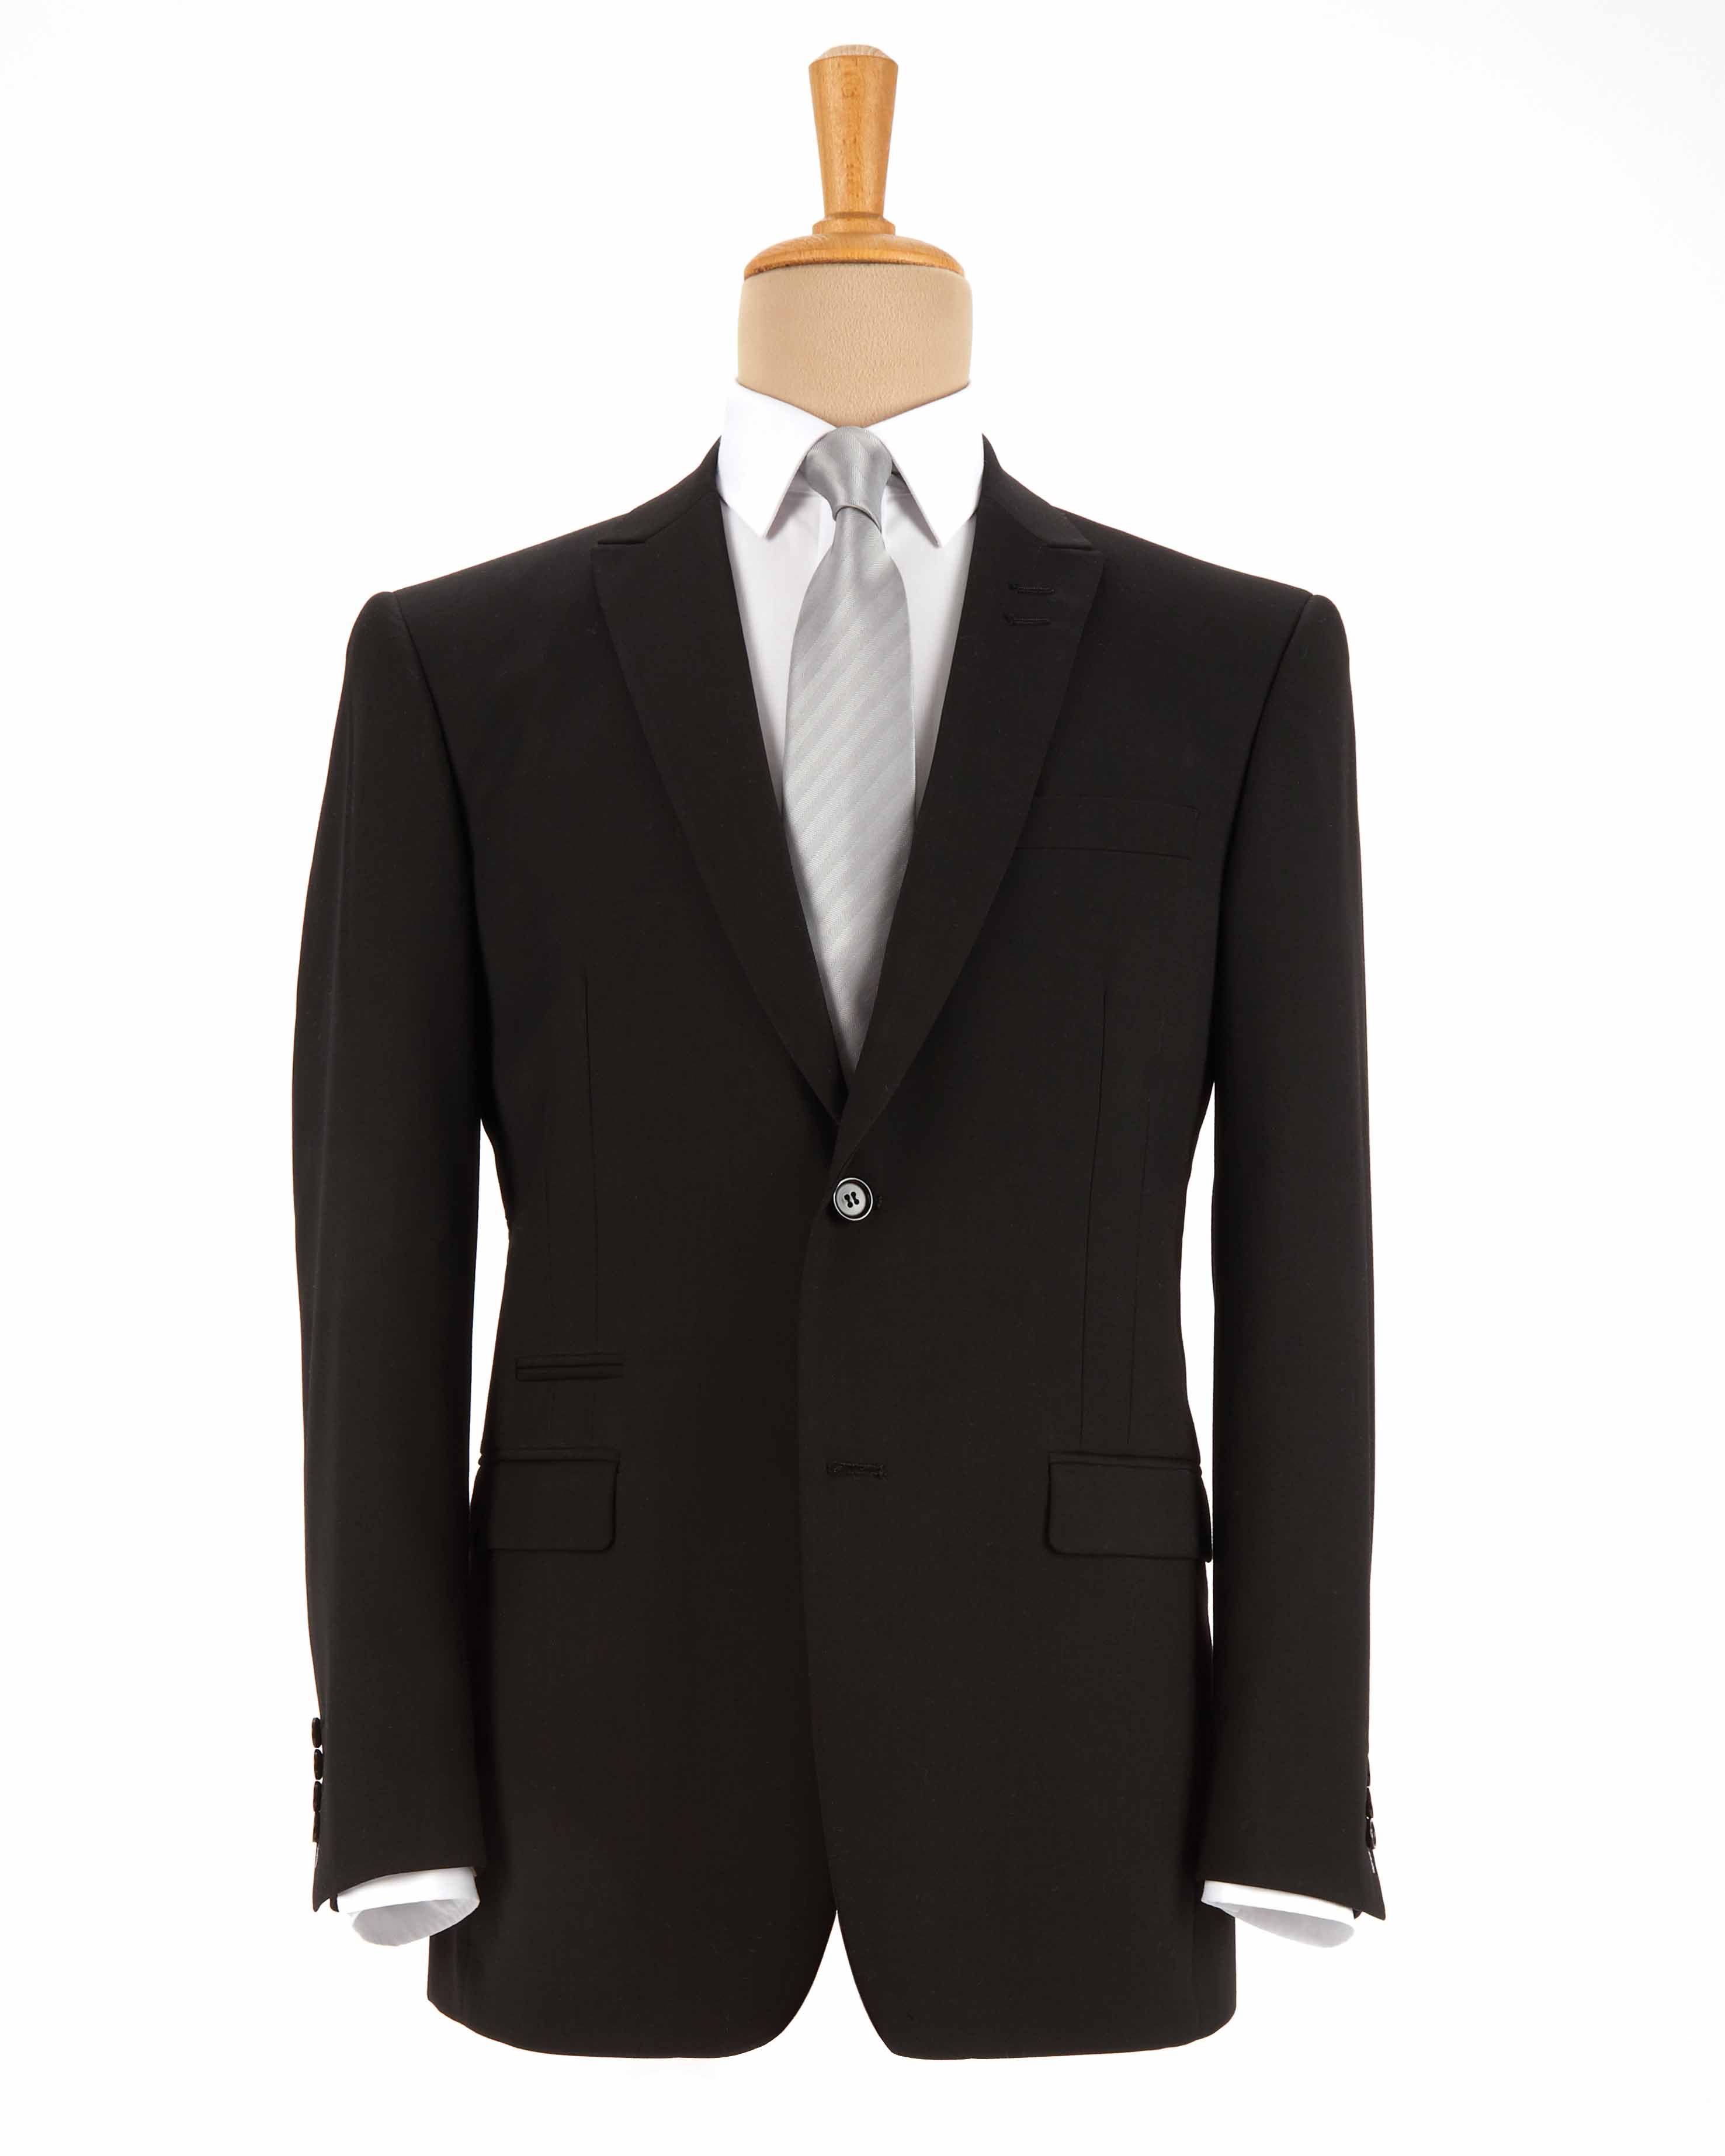 Men's Tailored Single Breasted Jacket | Sugdens | Corporate Clothing